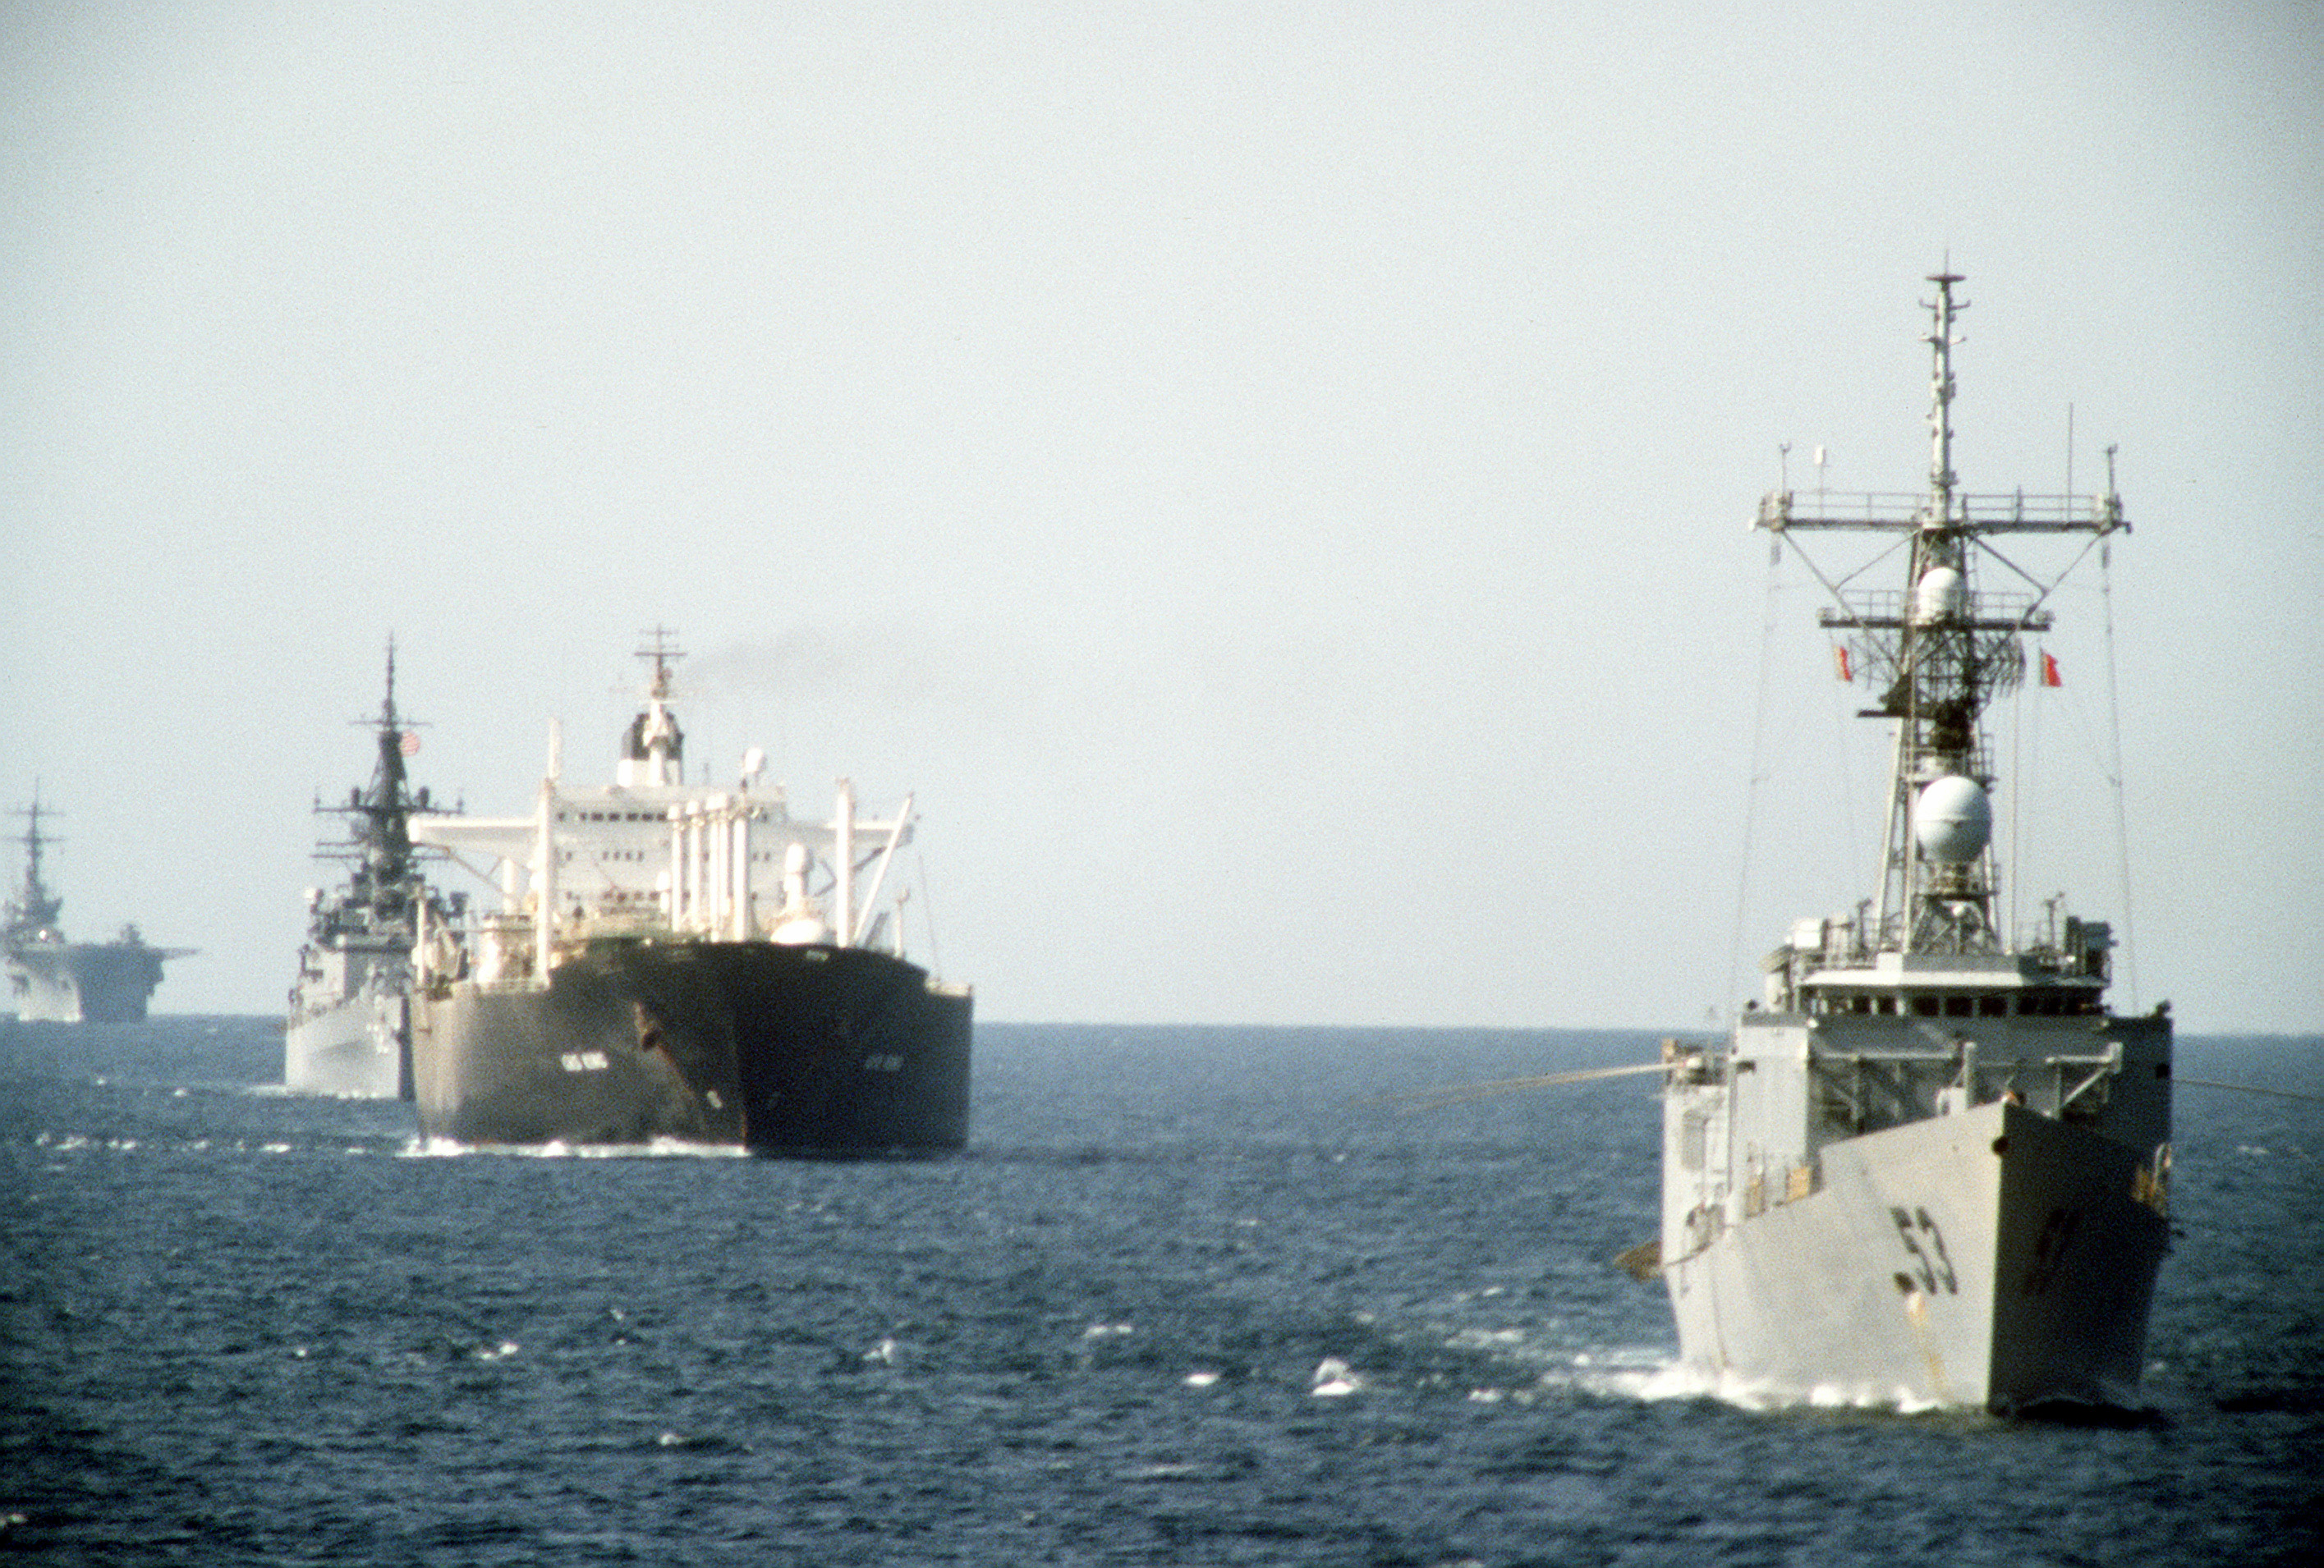 USS Hawes, USS William H. Standley and USS Guadalcanal escort a tanker in the Persian Gullf on 21 October 1987. National Archives. Public Domain.